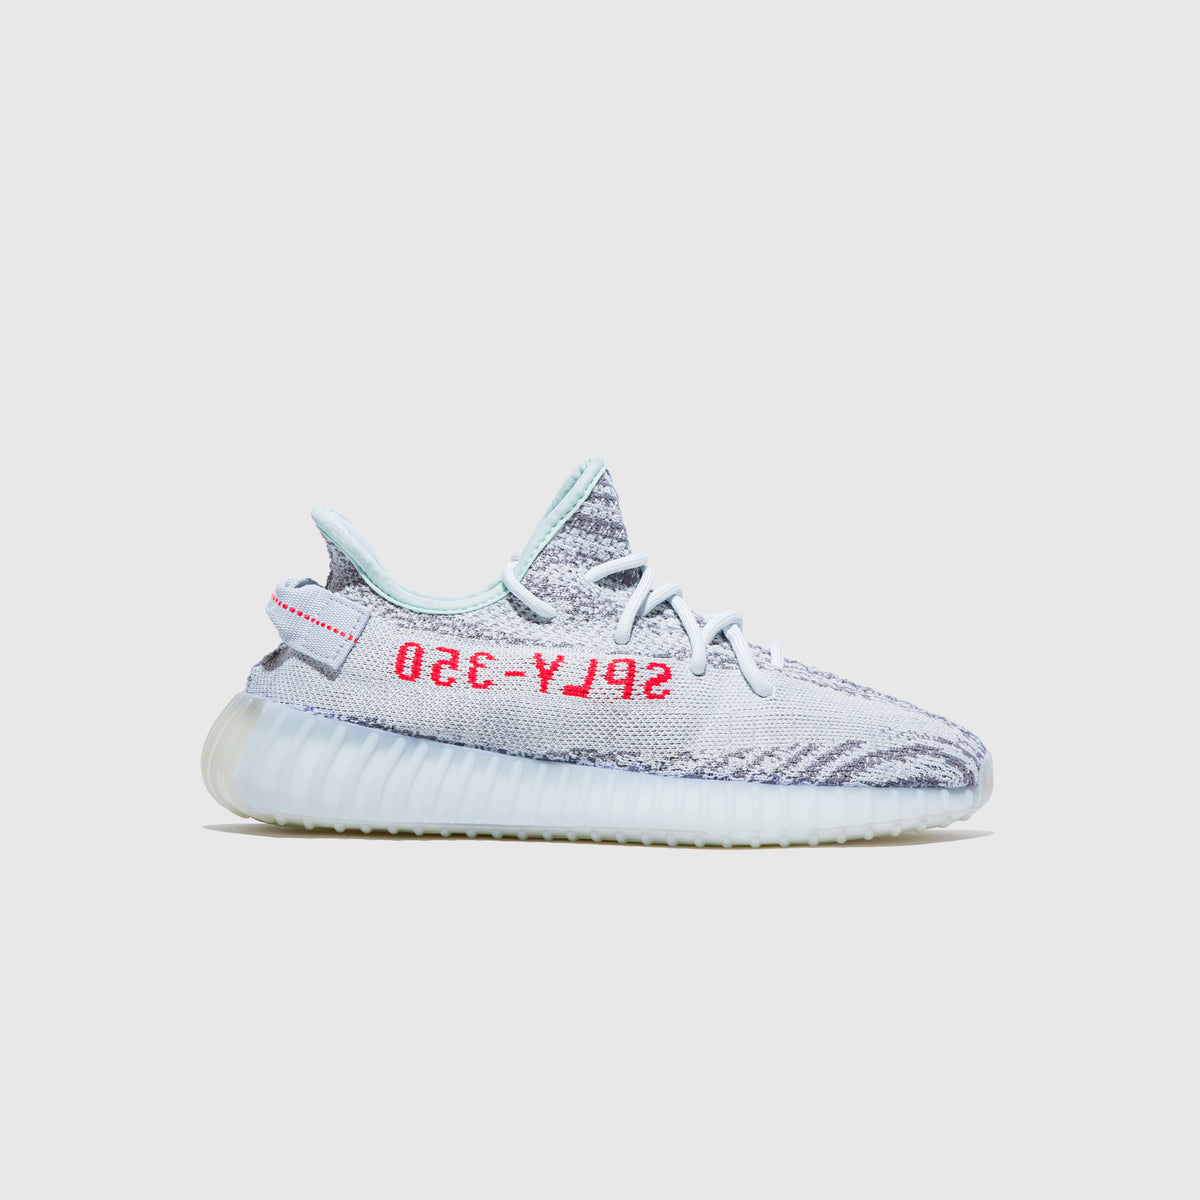 adidas Yeezy Boost 350 V2 Blue Tint Raffles and Release Date